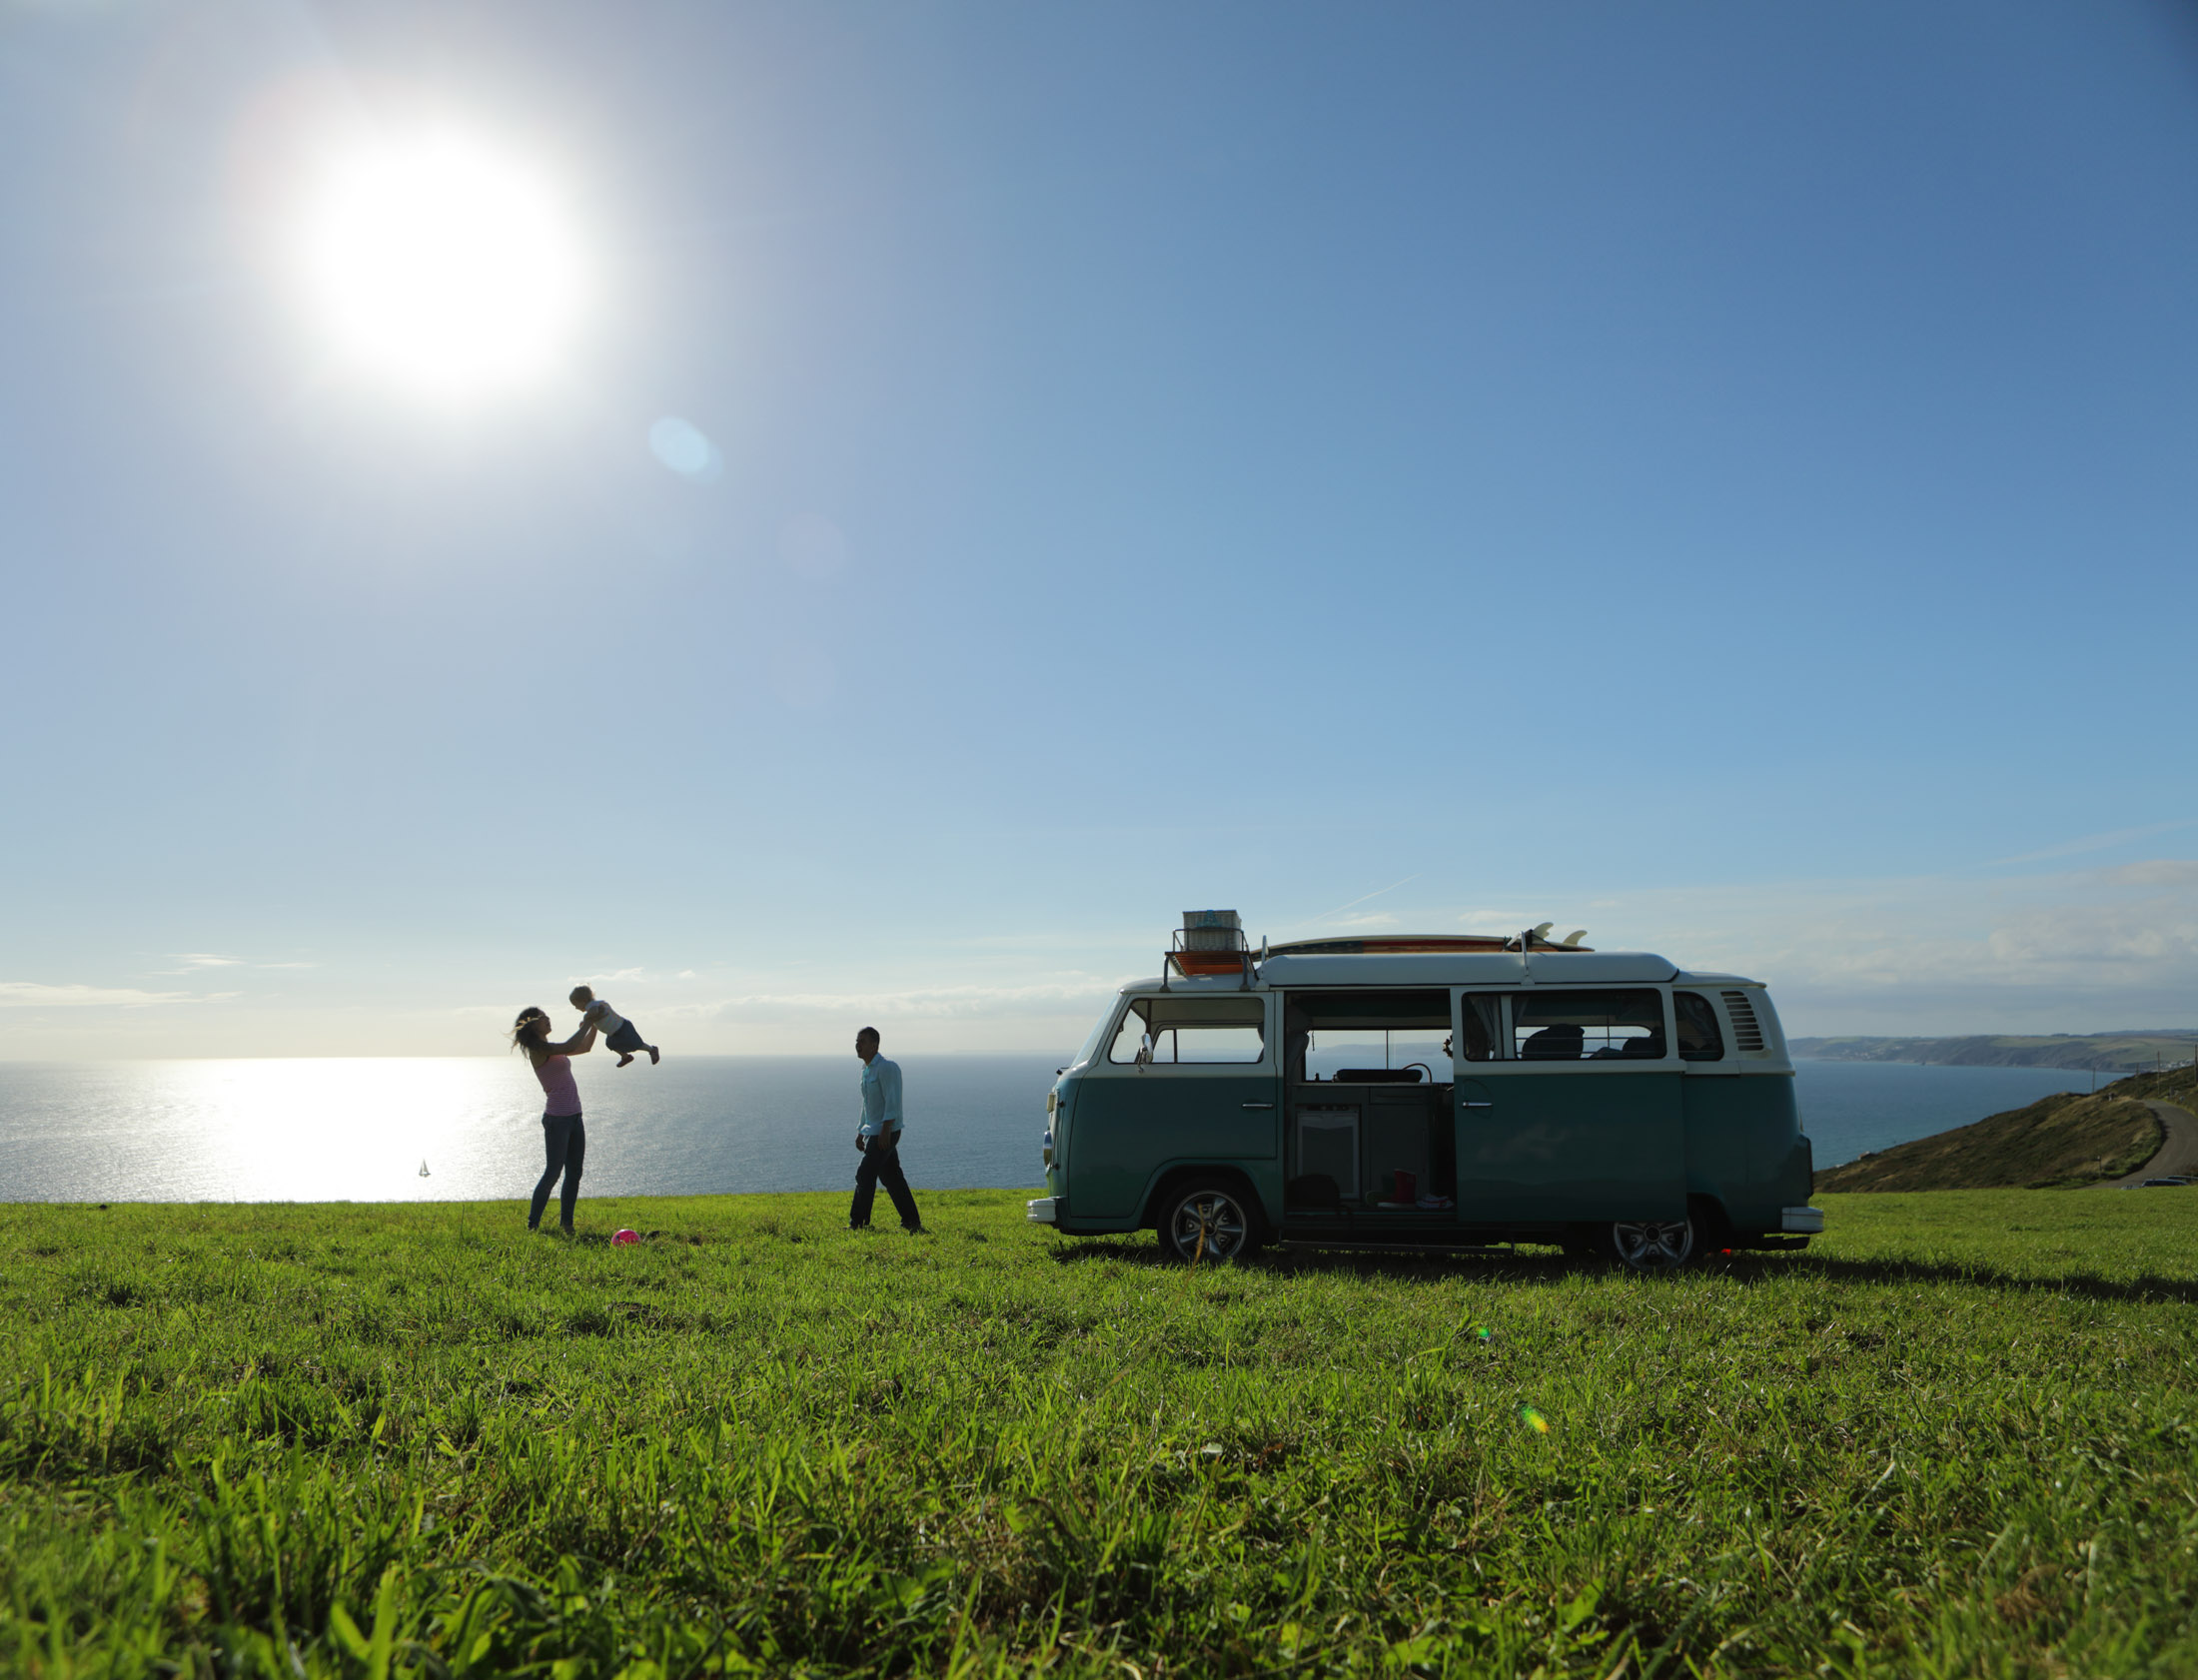 Family with camper in field by sea